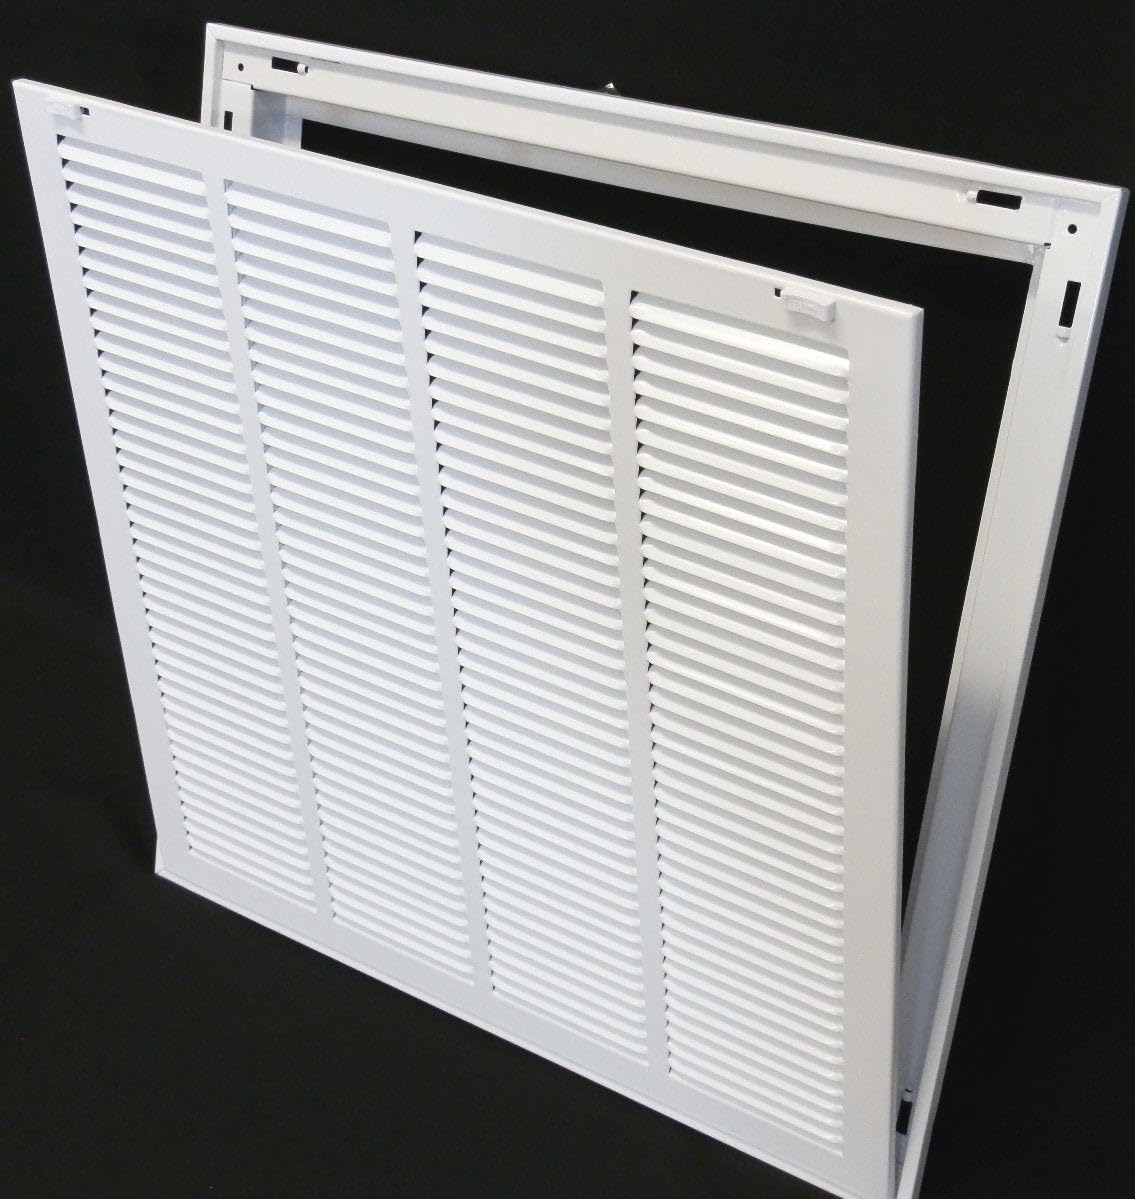 30&quot; X 6&quot; Steel Return Air Filter Grille for 1&quot; Filter - Removable Frame - [Outer Dimensions: 32 5/8&quot; X 8 5/8&quot;]